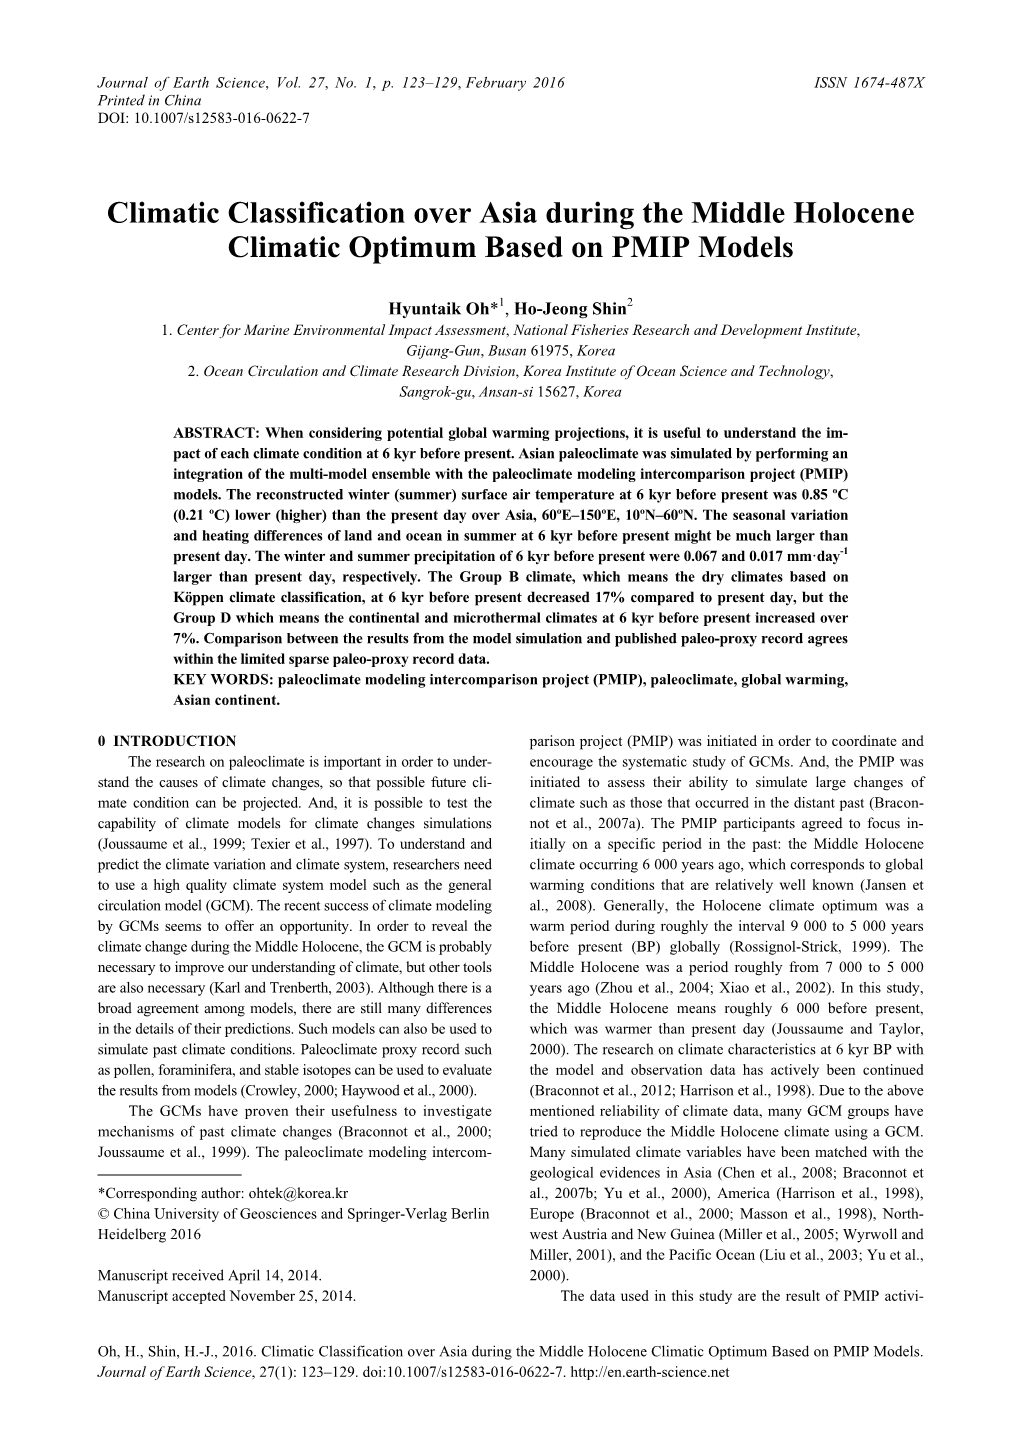 Climatic Classification Over Asia During the Middle Holocene Climatic Optimum Based on PMIP Models